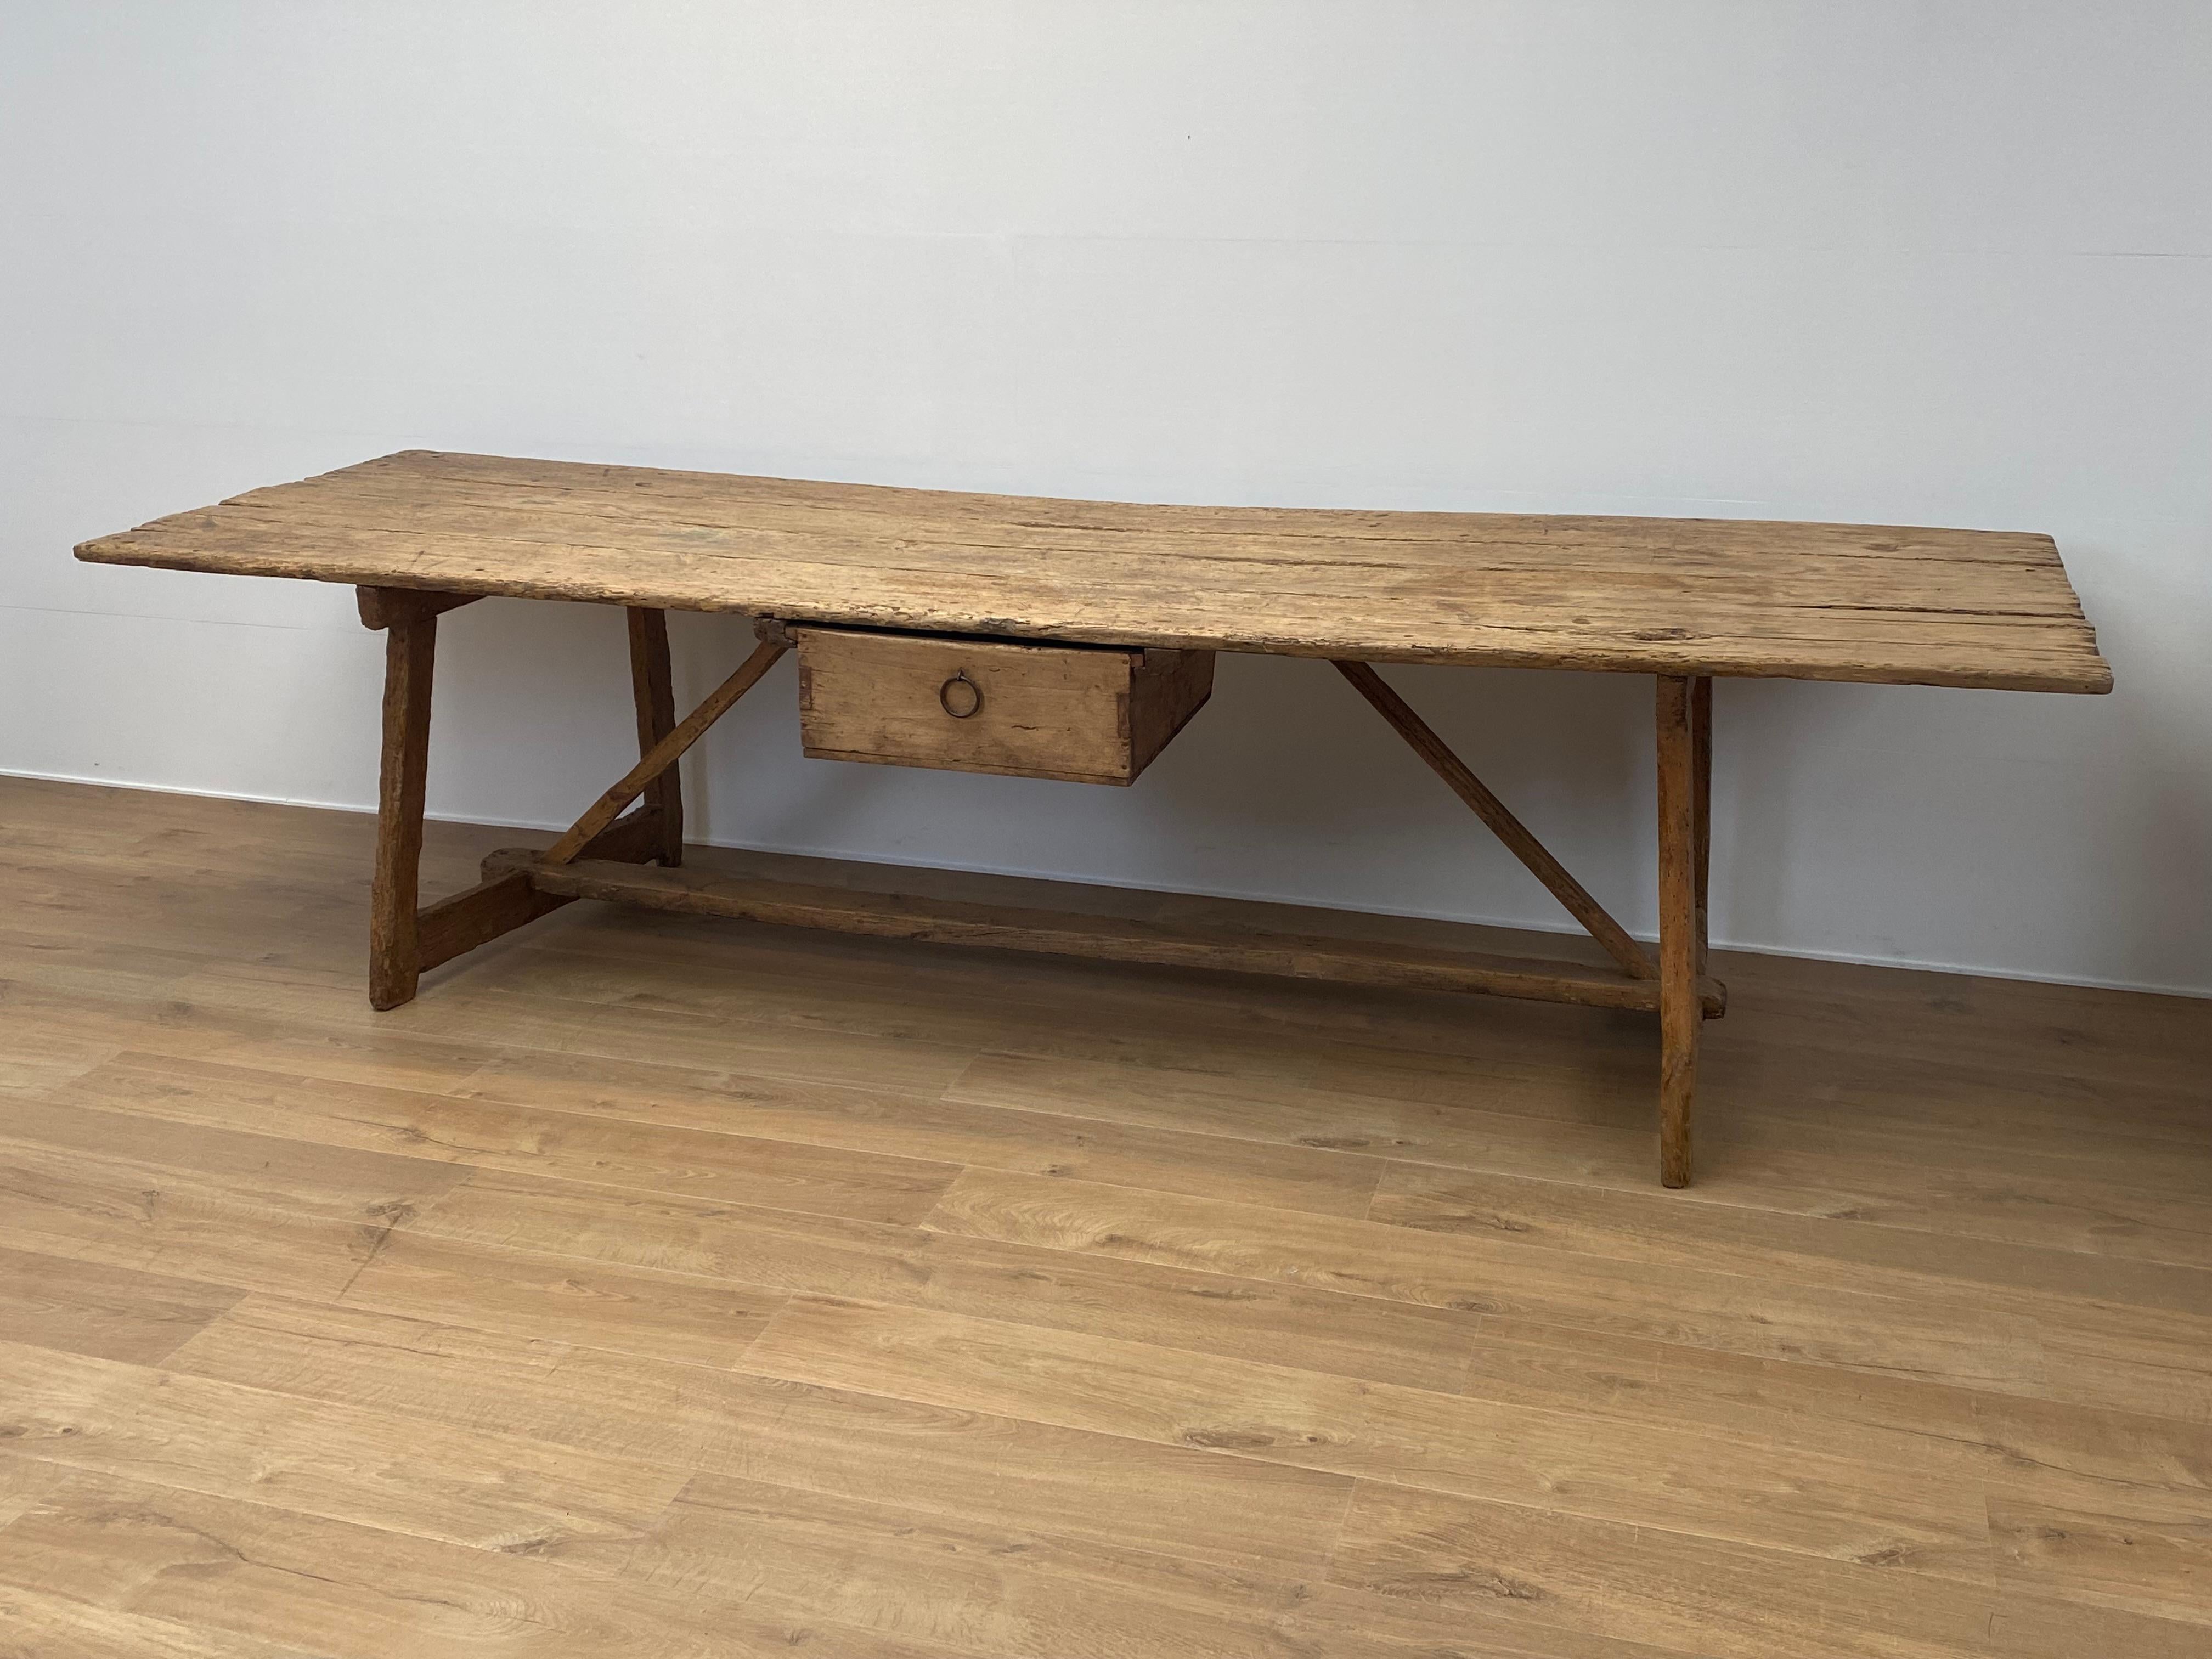 Rustic,Brutalist Spanish Farm table in a bleached Chestnut Wood,
the table comes from a Country house in the Catalan Regio of Girona,
very beautiful warm wear of the wood, great old genuine patina,
the table has one drawer in the center and shows